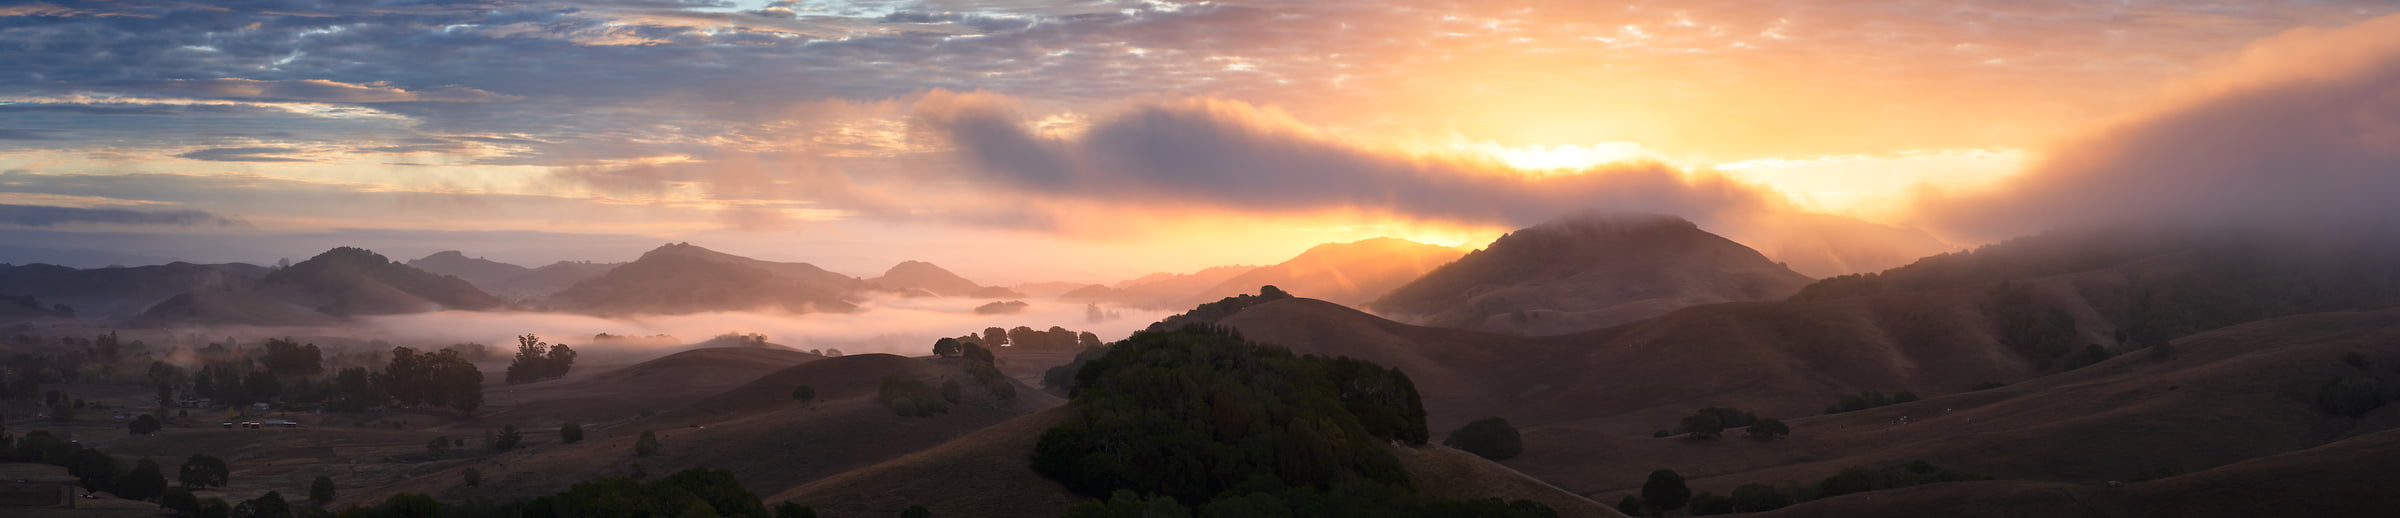 339 megapixels! A very high resolution, large-format VAST photo print of a sunrise landscape panorama; photograph created by Jeff Lewis in Petaluma, California.